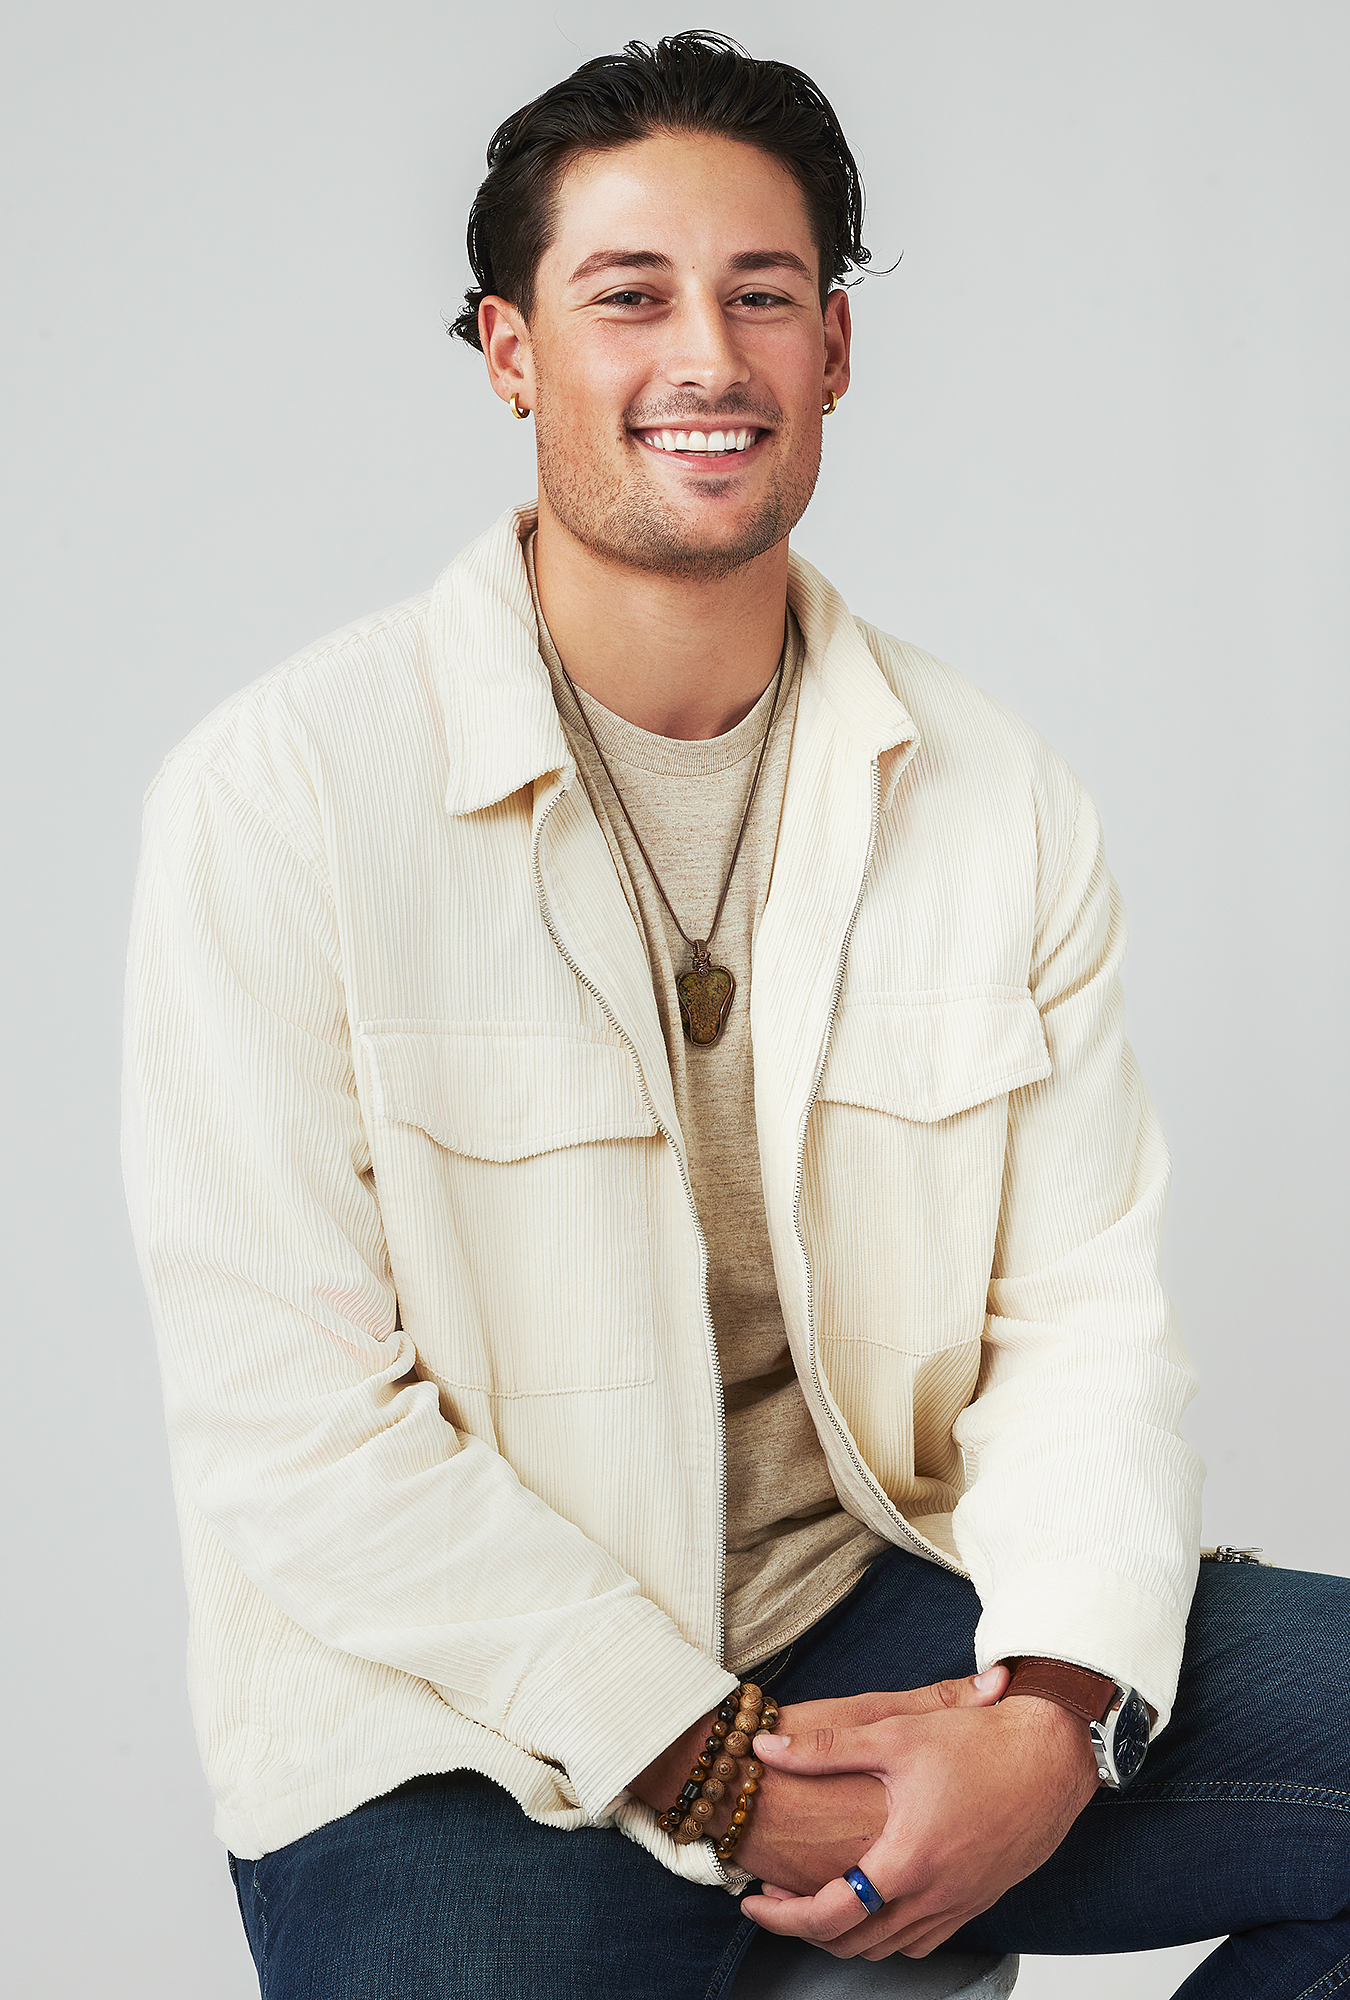 'Bachelorette' Season 20 Contestant Brayden Bowers: 5 Things to Know